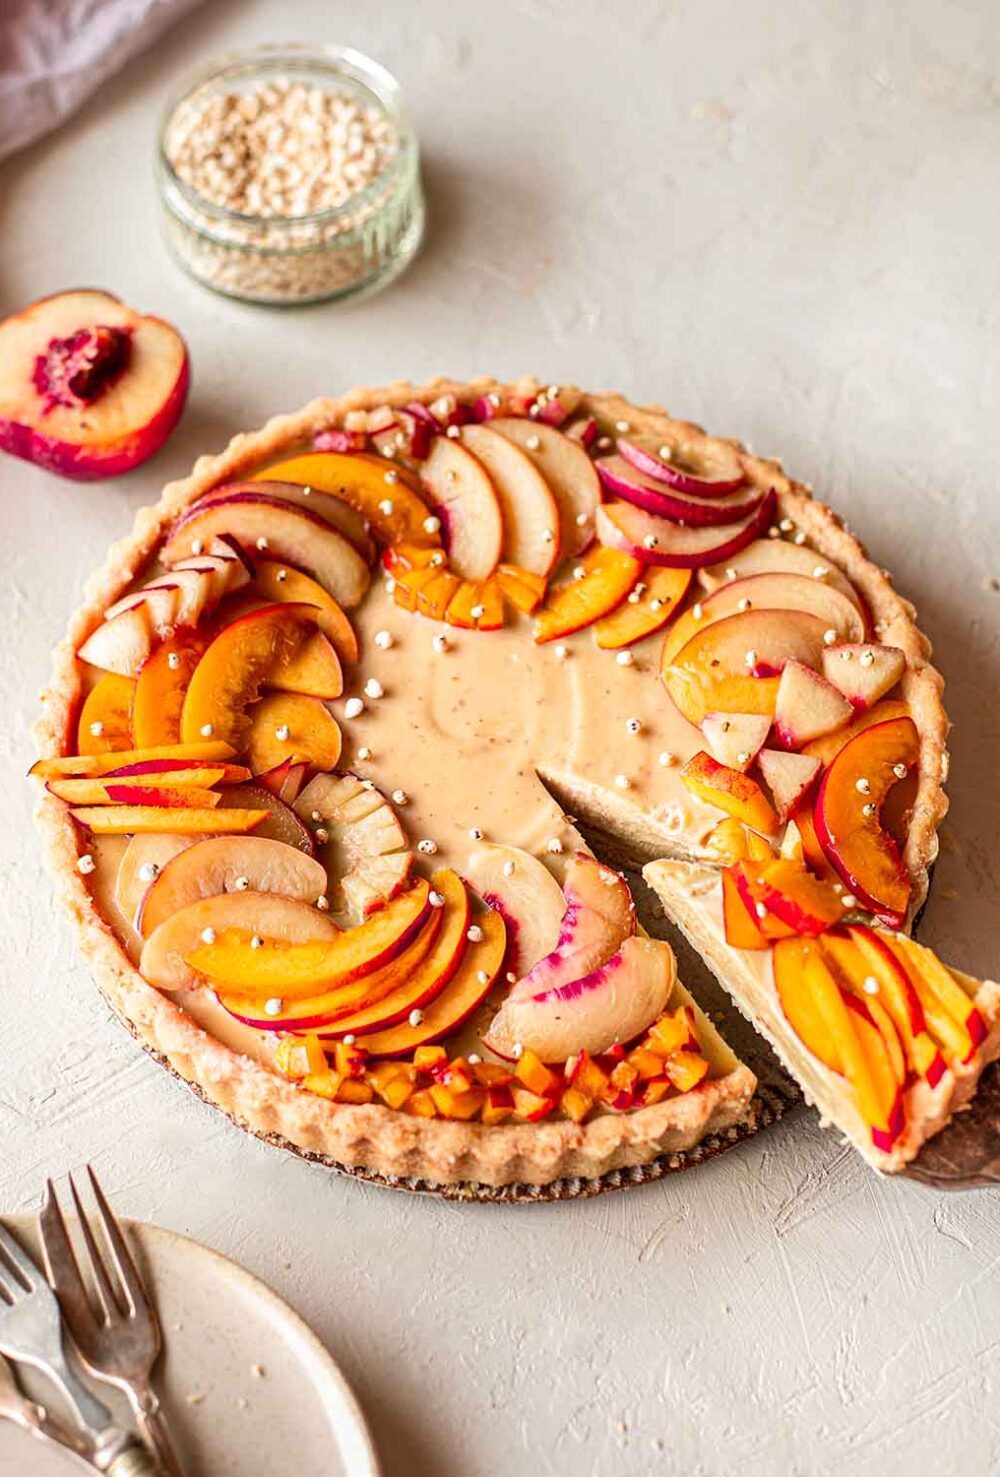 Vegan nectarine tart on plate with slice coming out.